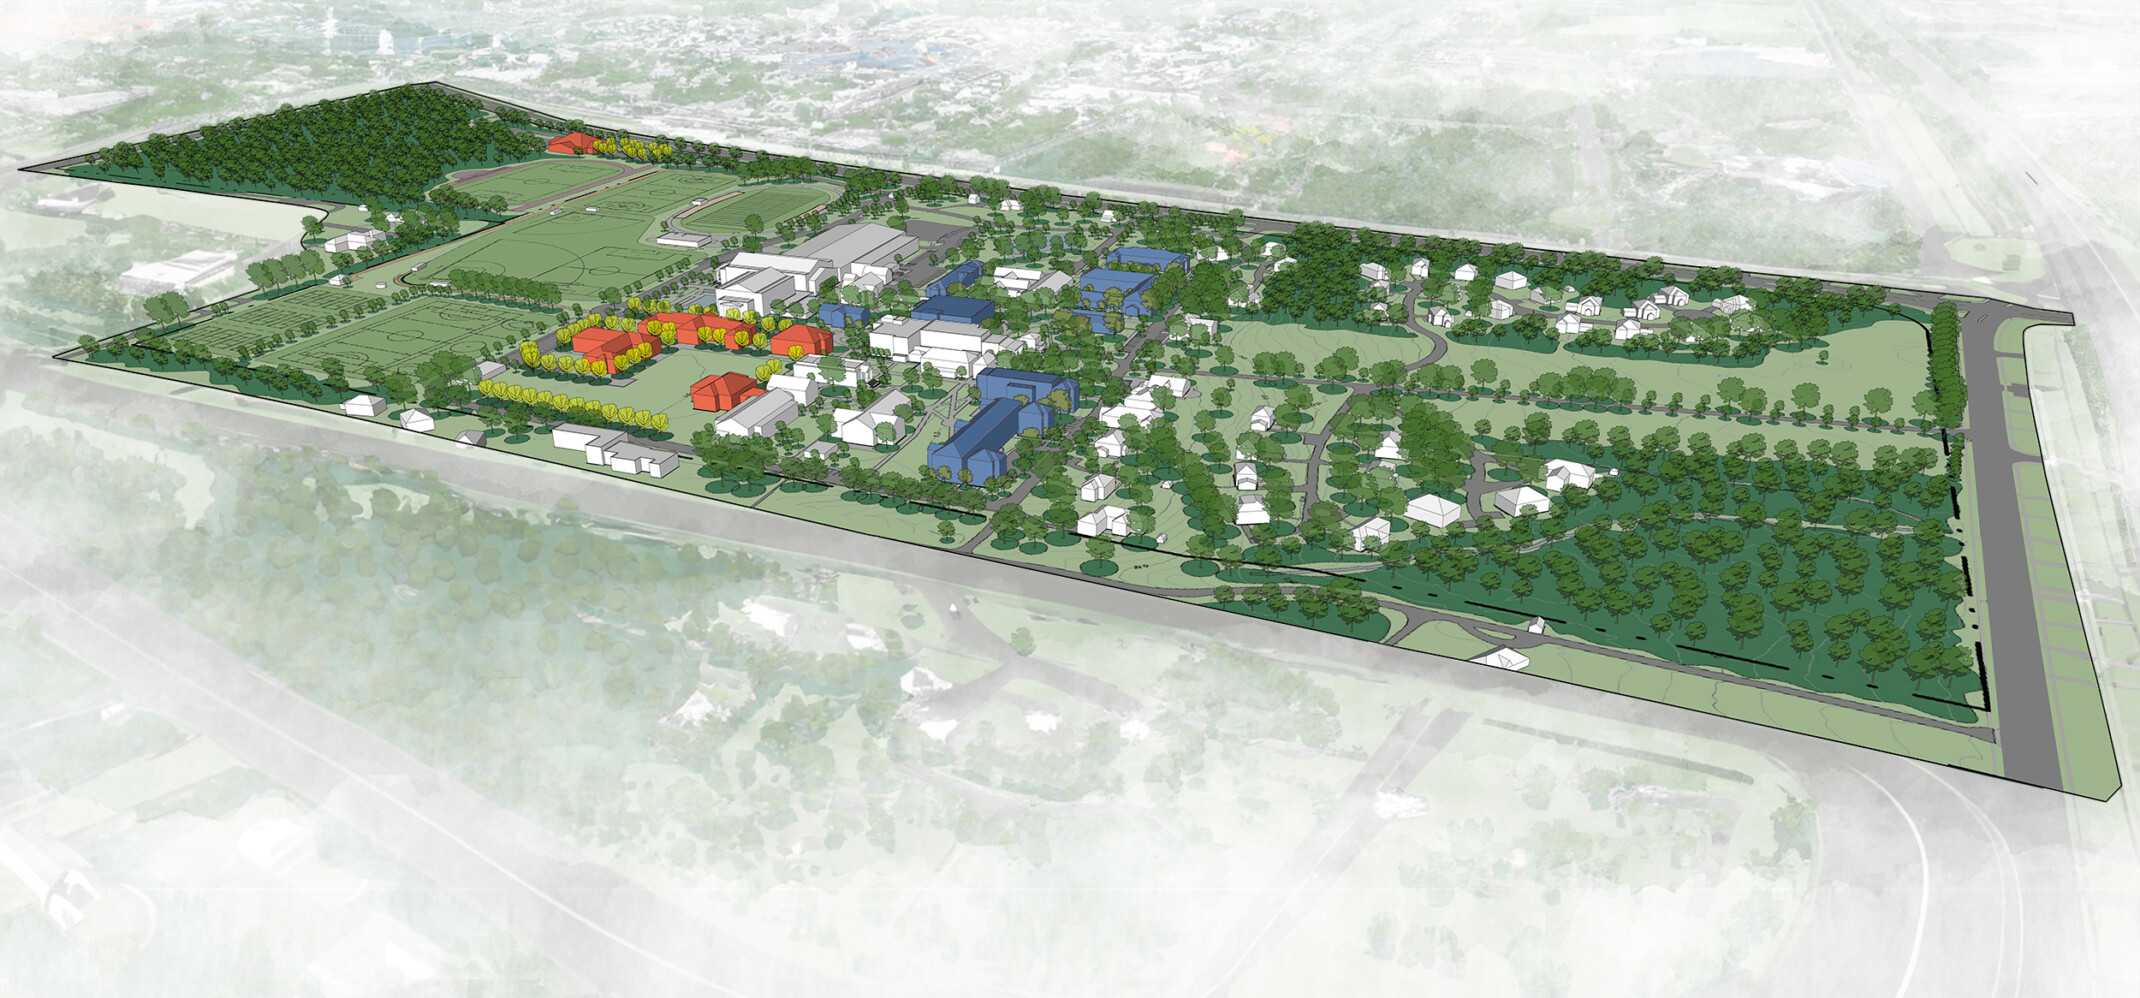 Rendering of a high school campus showing blue, red, and white buildings with trees, football and baseball fields.